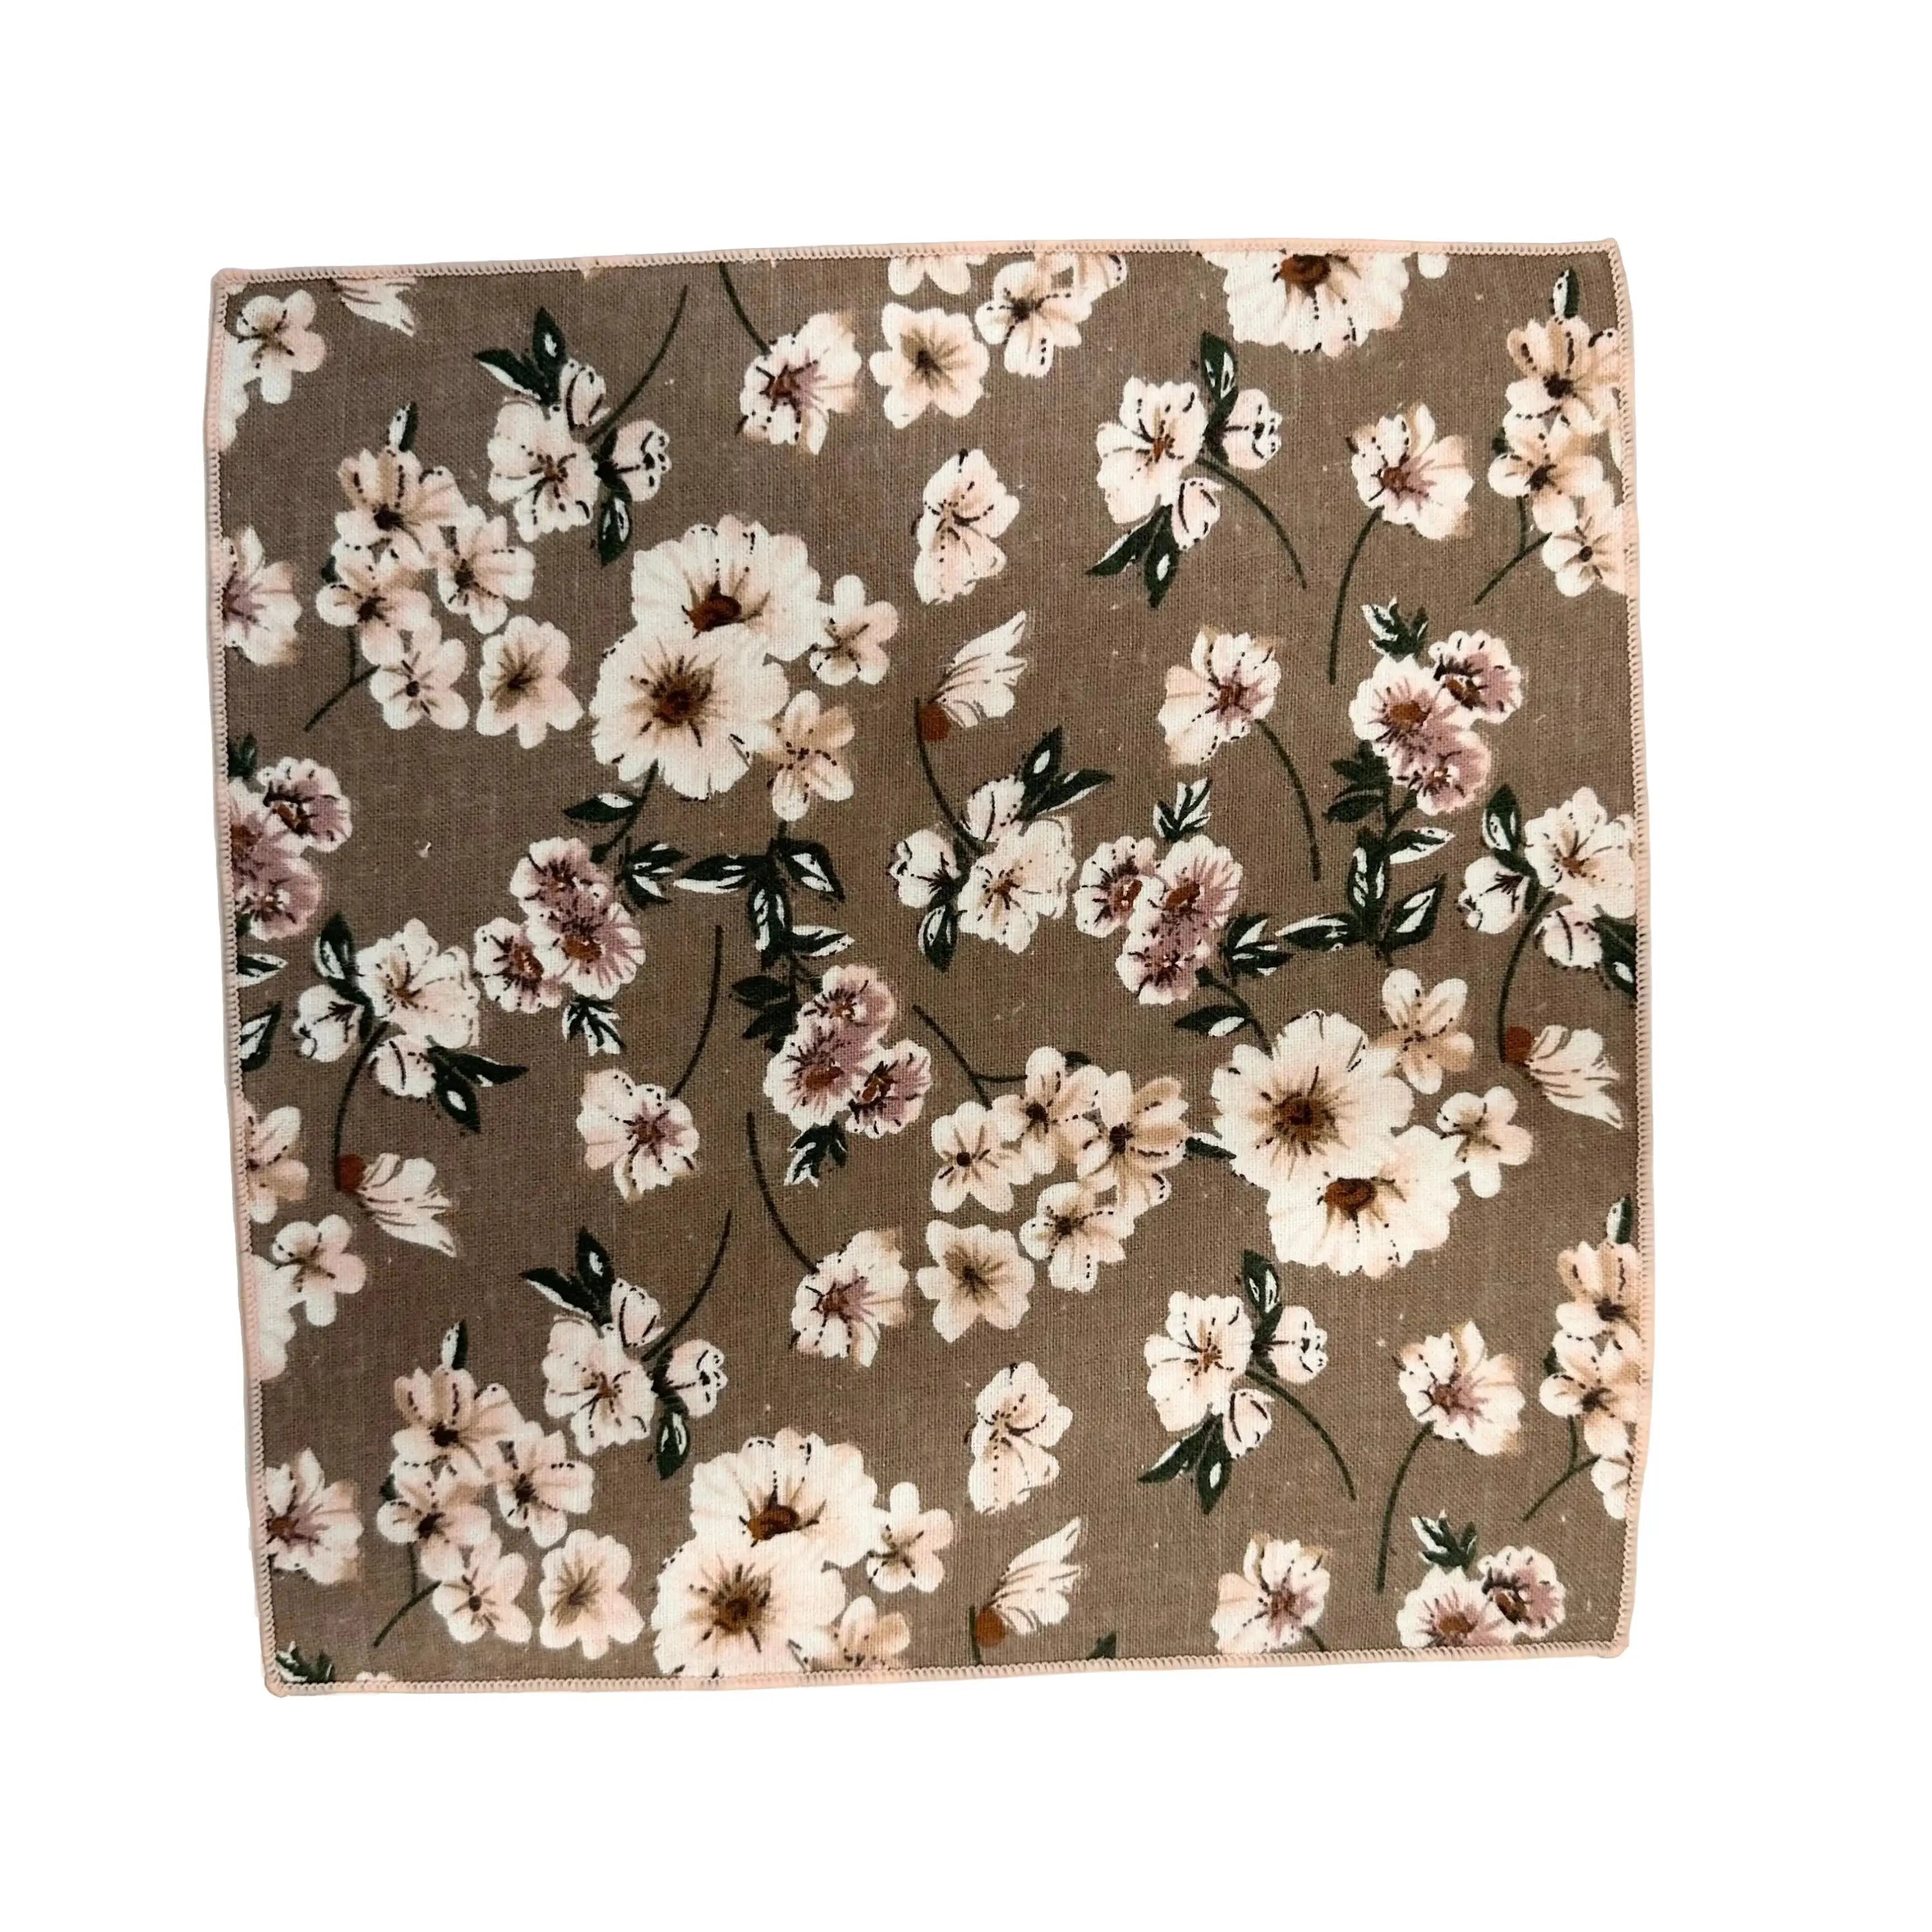 Taupe Floral Pocket Square DEAN - MYTIESHOP | taupe green floral Mytieshop Gray and Green Floral Pocket Square Material CottonItem Length: 23 cm ( 9 inches)Item Width : 22 cm (8.6 inches) Color: Gray Great for: Groom Groomsmen Wedding Shoots Formal Prom Fancy Parties Gifts and presents